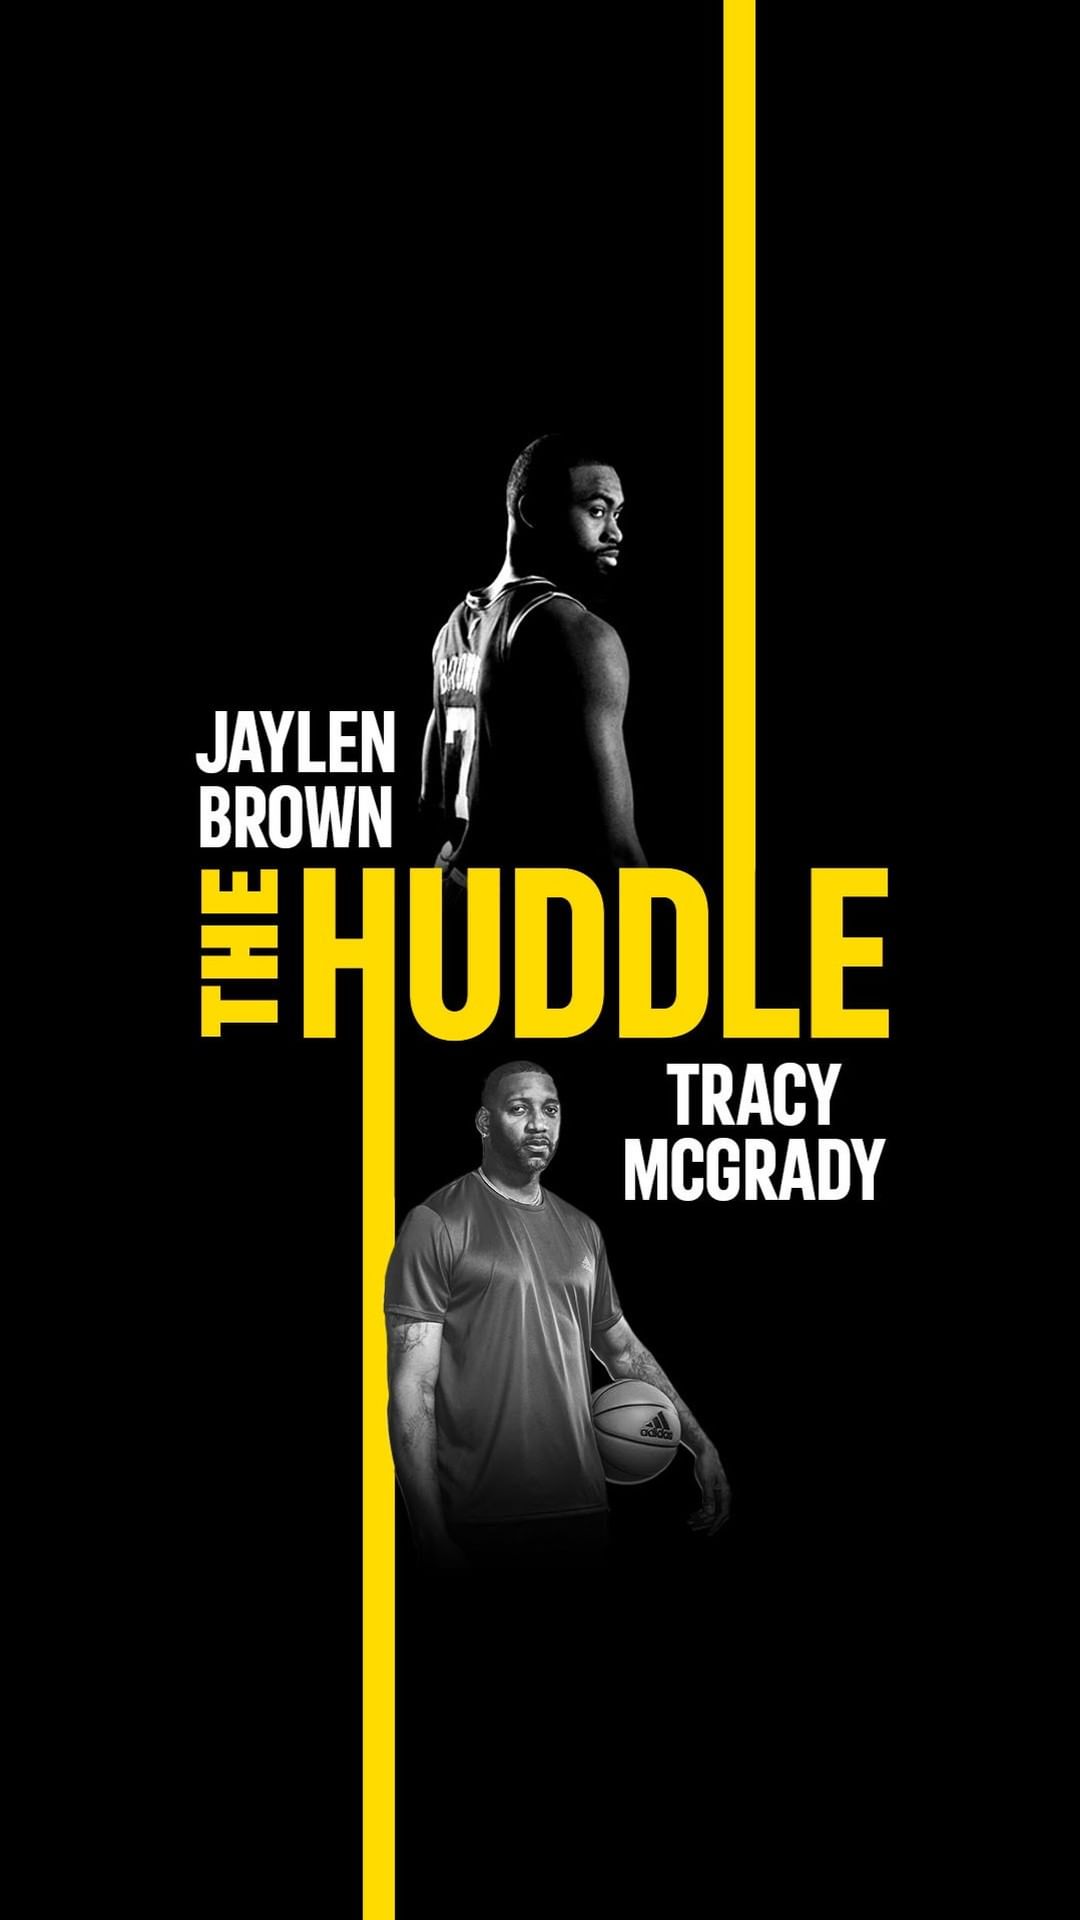 adidas - “The handles, the creativity, you’ve got all that.”⠀
⠀
Join @fchwpo and @tmac213 in The Huddle as they discuss their passion for basketball, keeping each other inspired and how they’re stayin...